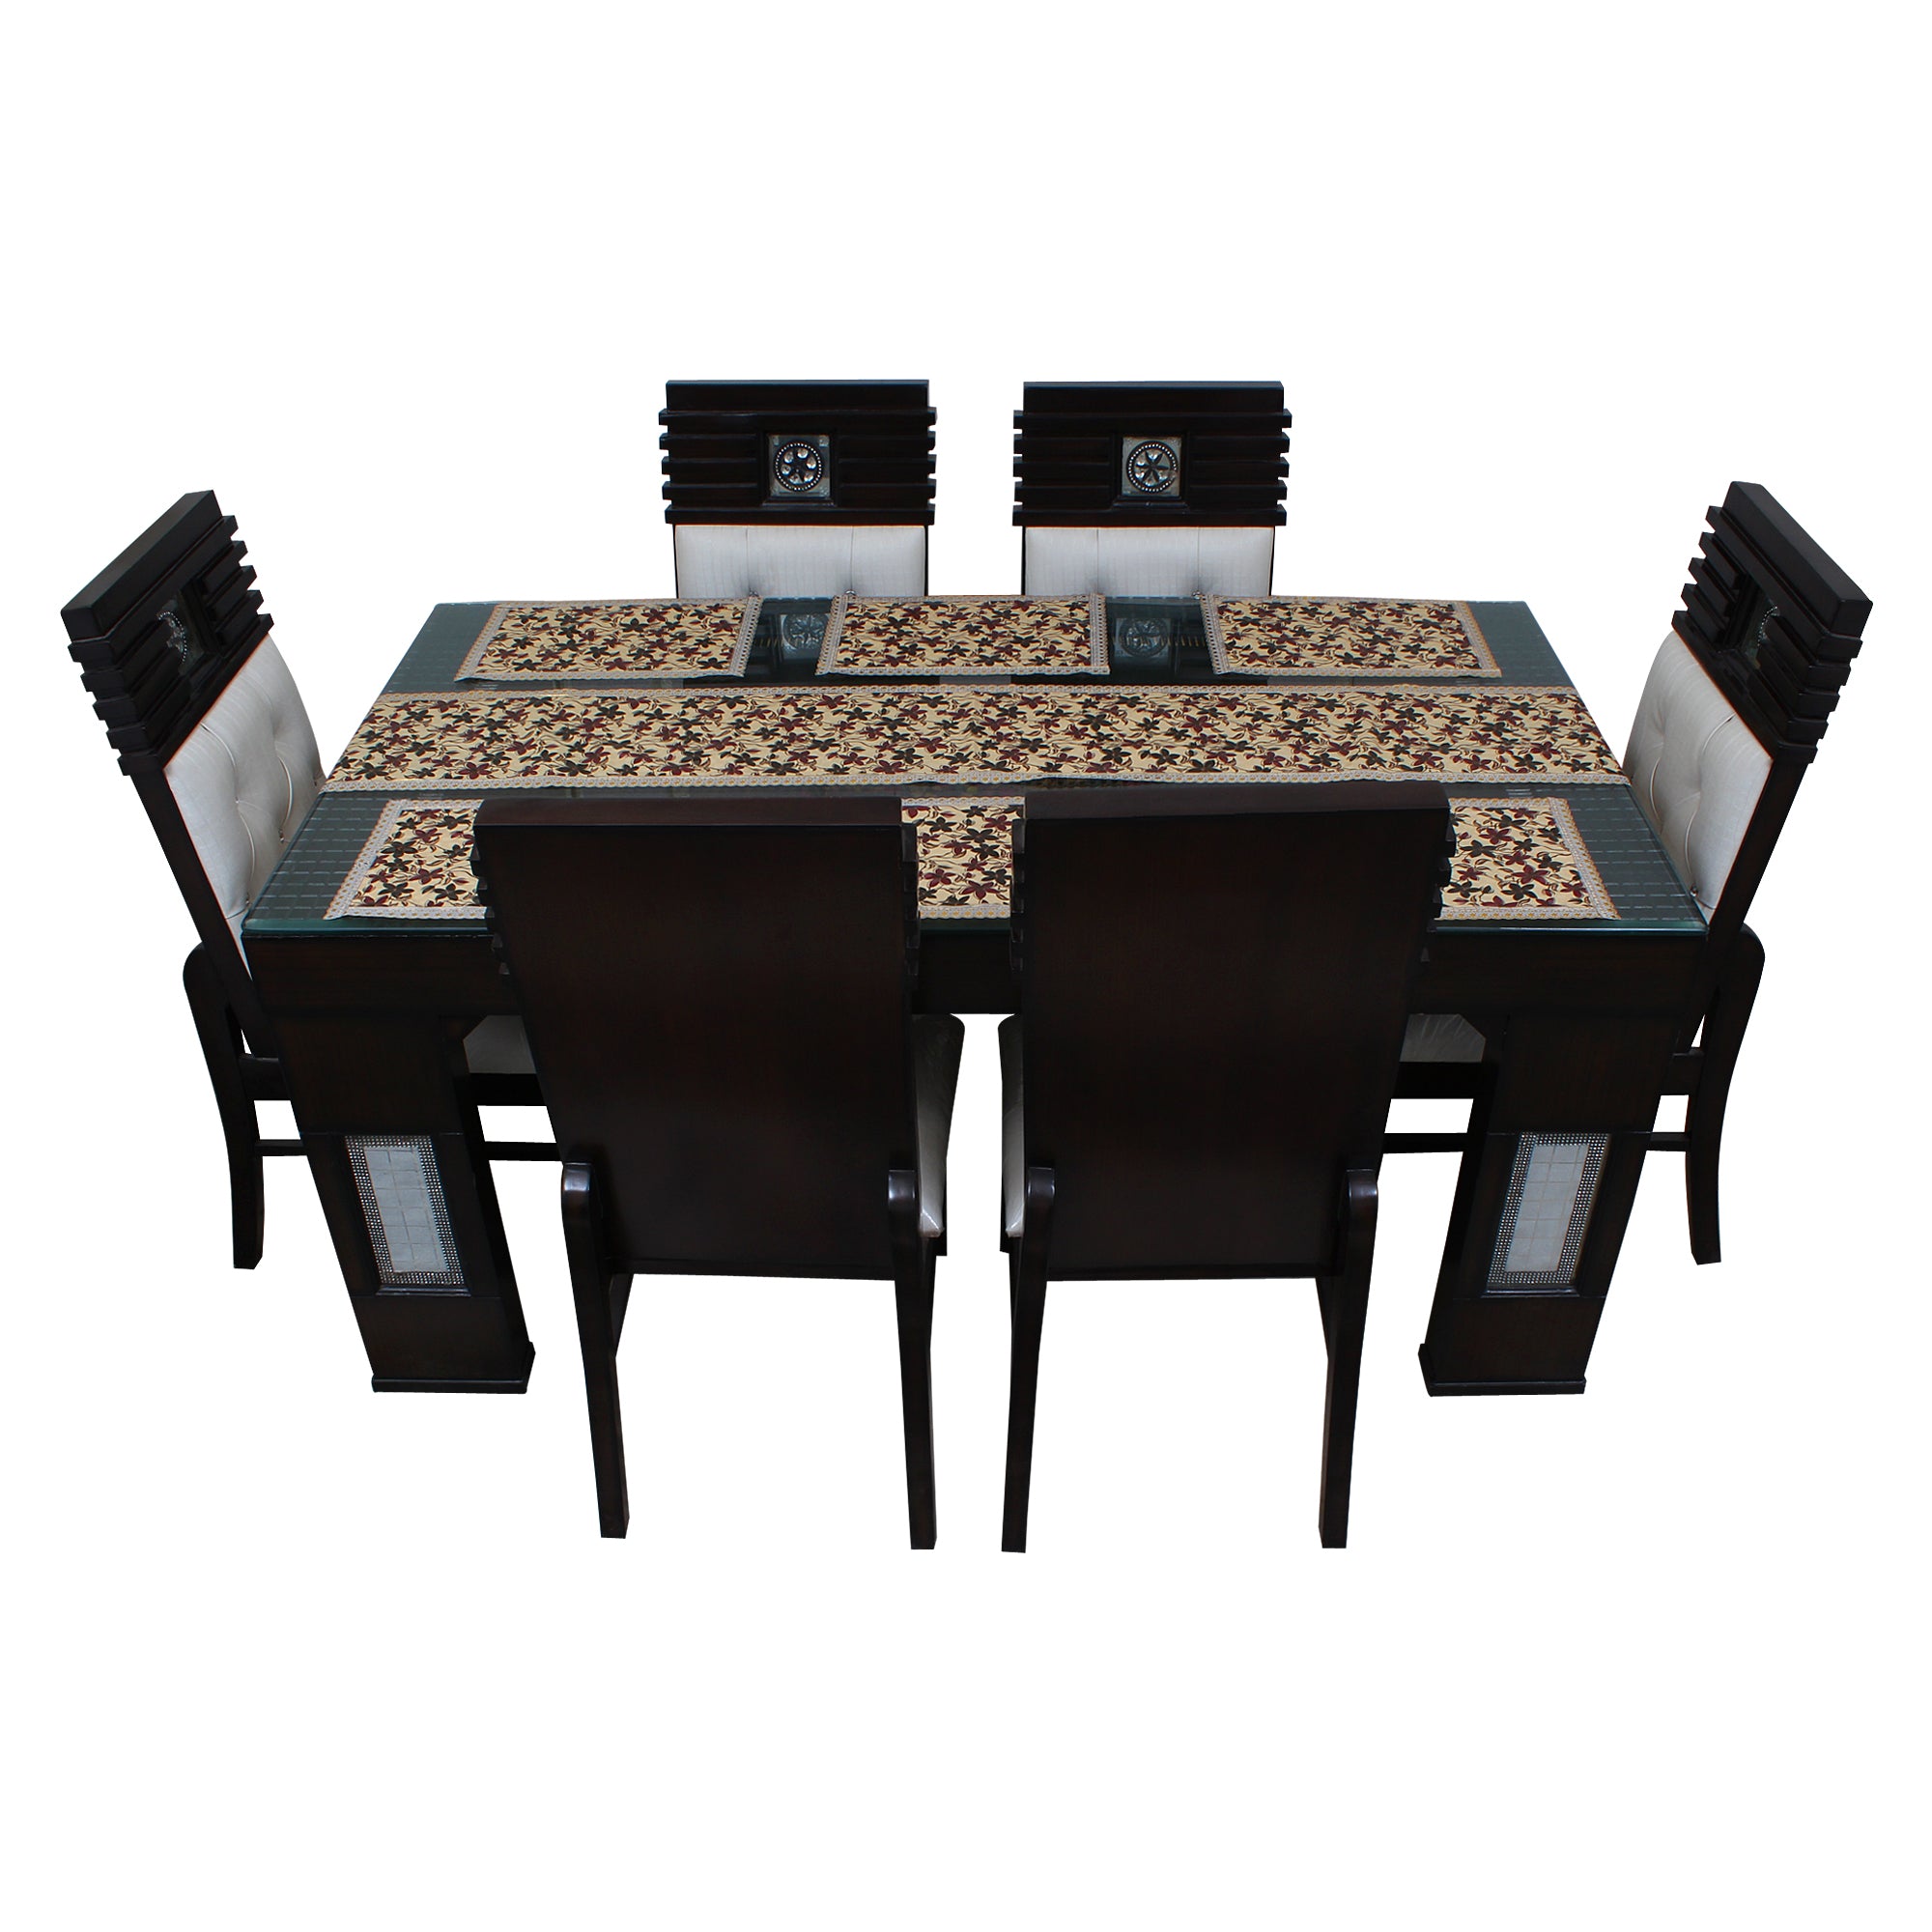 Waterproof & Dustproof Dining Table Runner With 6 Placemats, SA04 - Dream Care Furnishings Private Limited